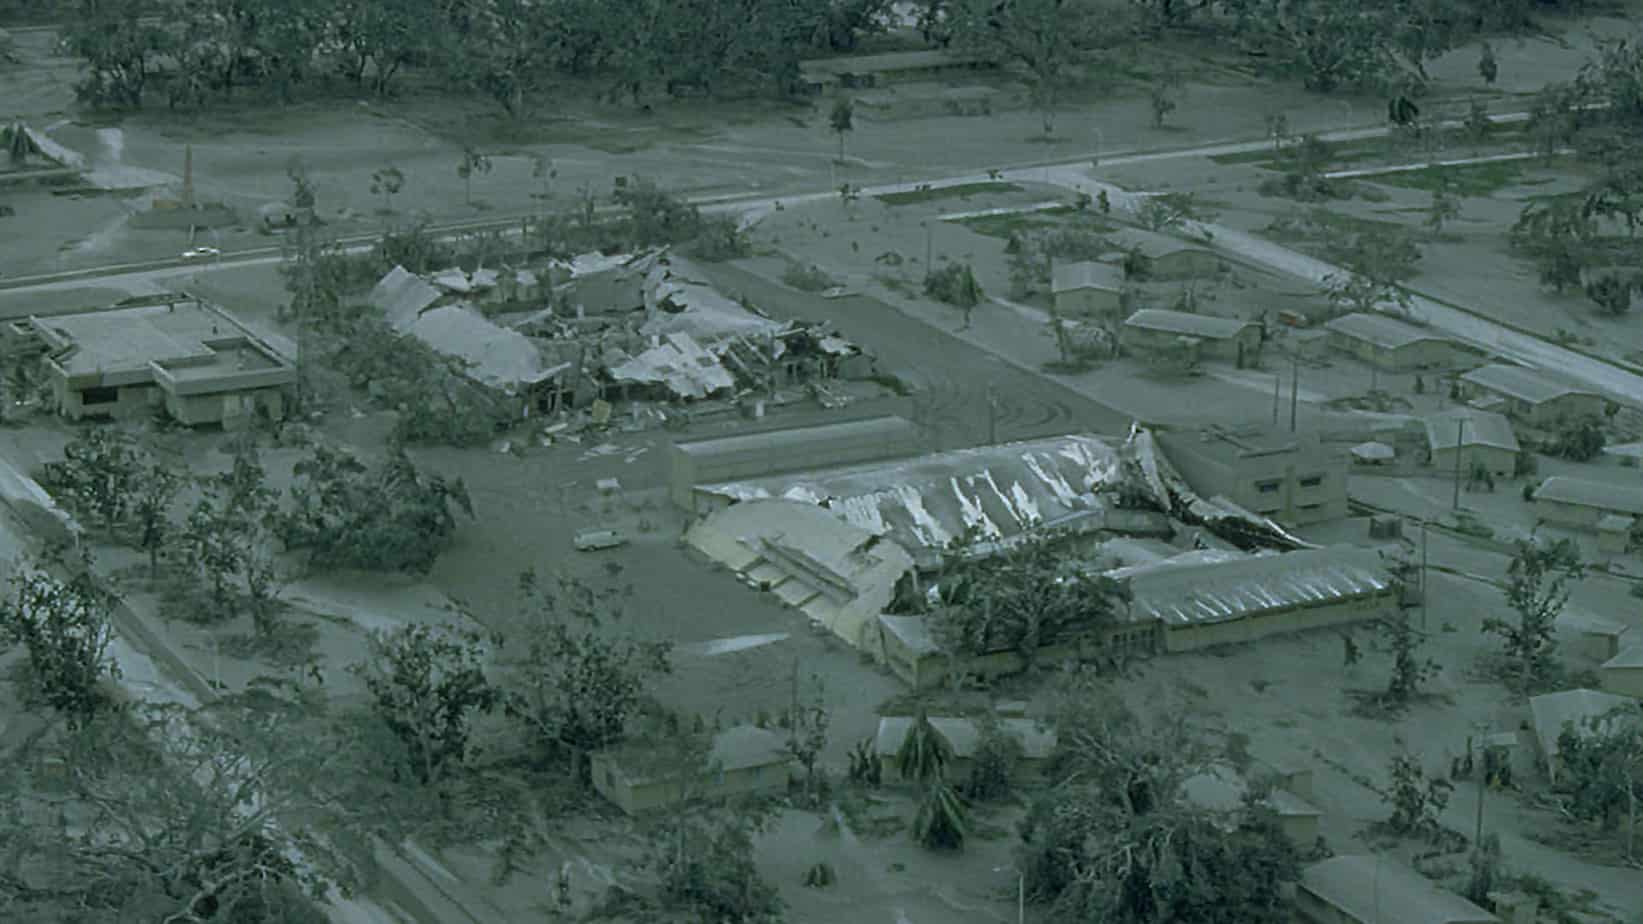 Historical fiction portrays a town on the Typhoon Coast destroyed by Hurricane Katrina, offering an aerial view.